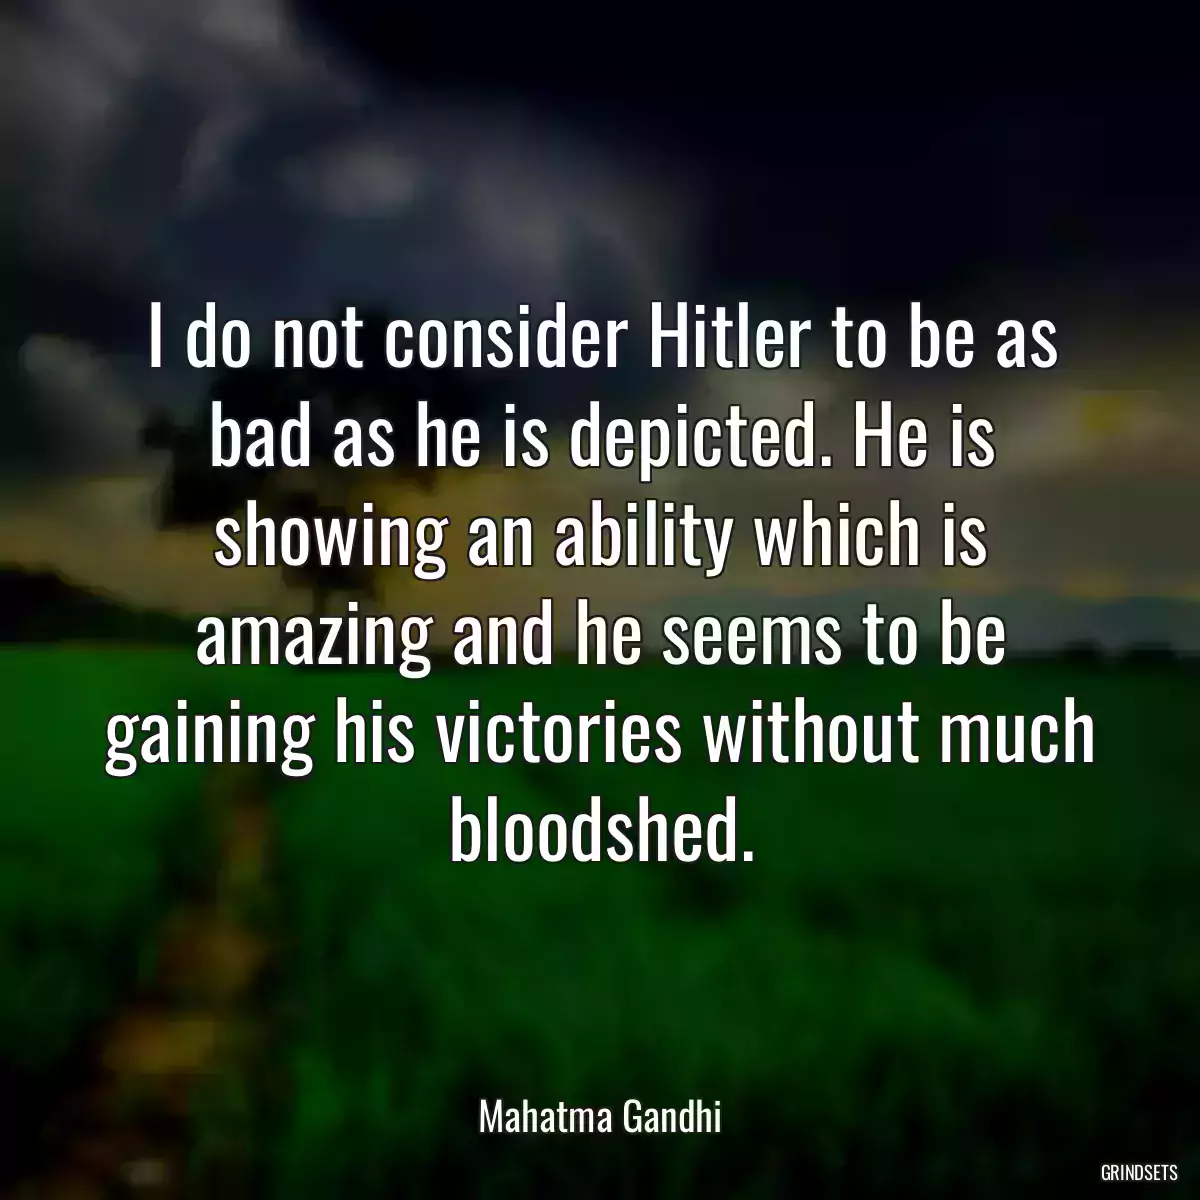 I do not consider Hitler to be as bad as he is depicted. He is showing an ability which is amazing and he seems to be gaining his victories without much bloodshed.